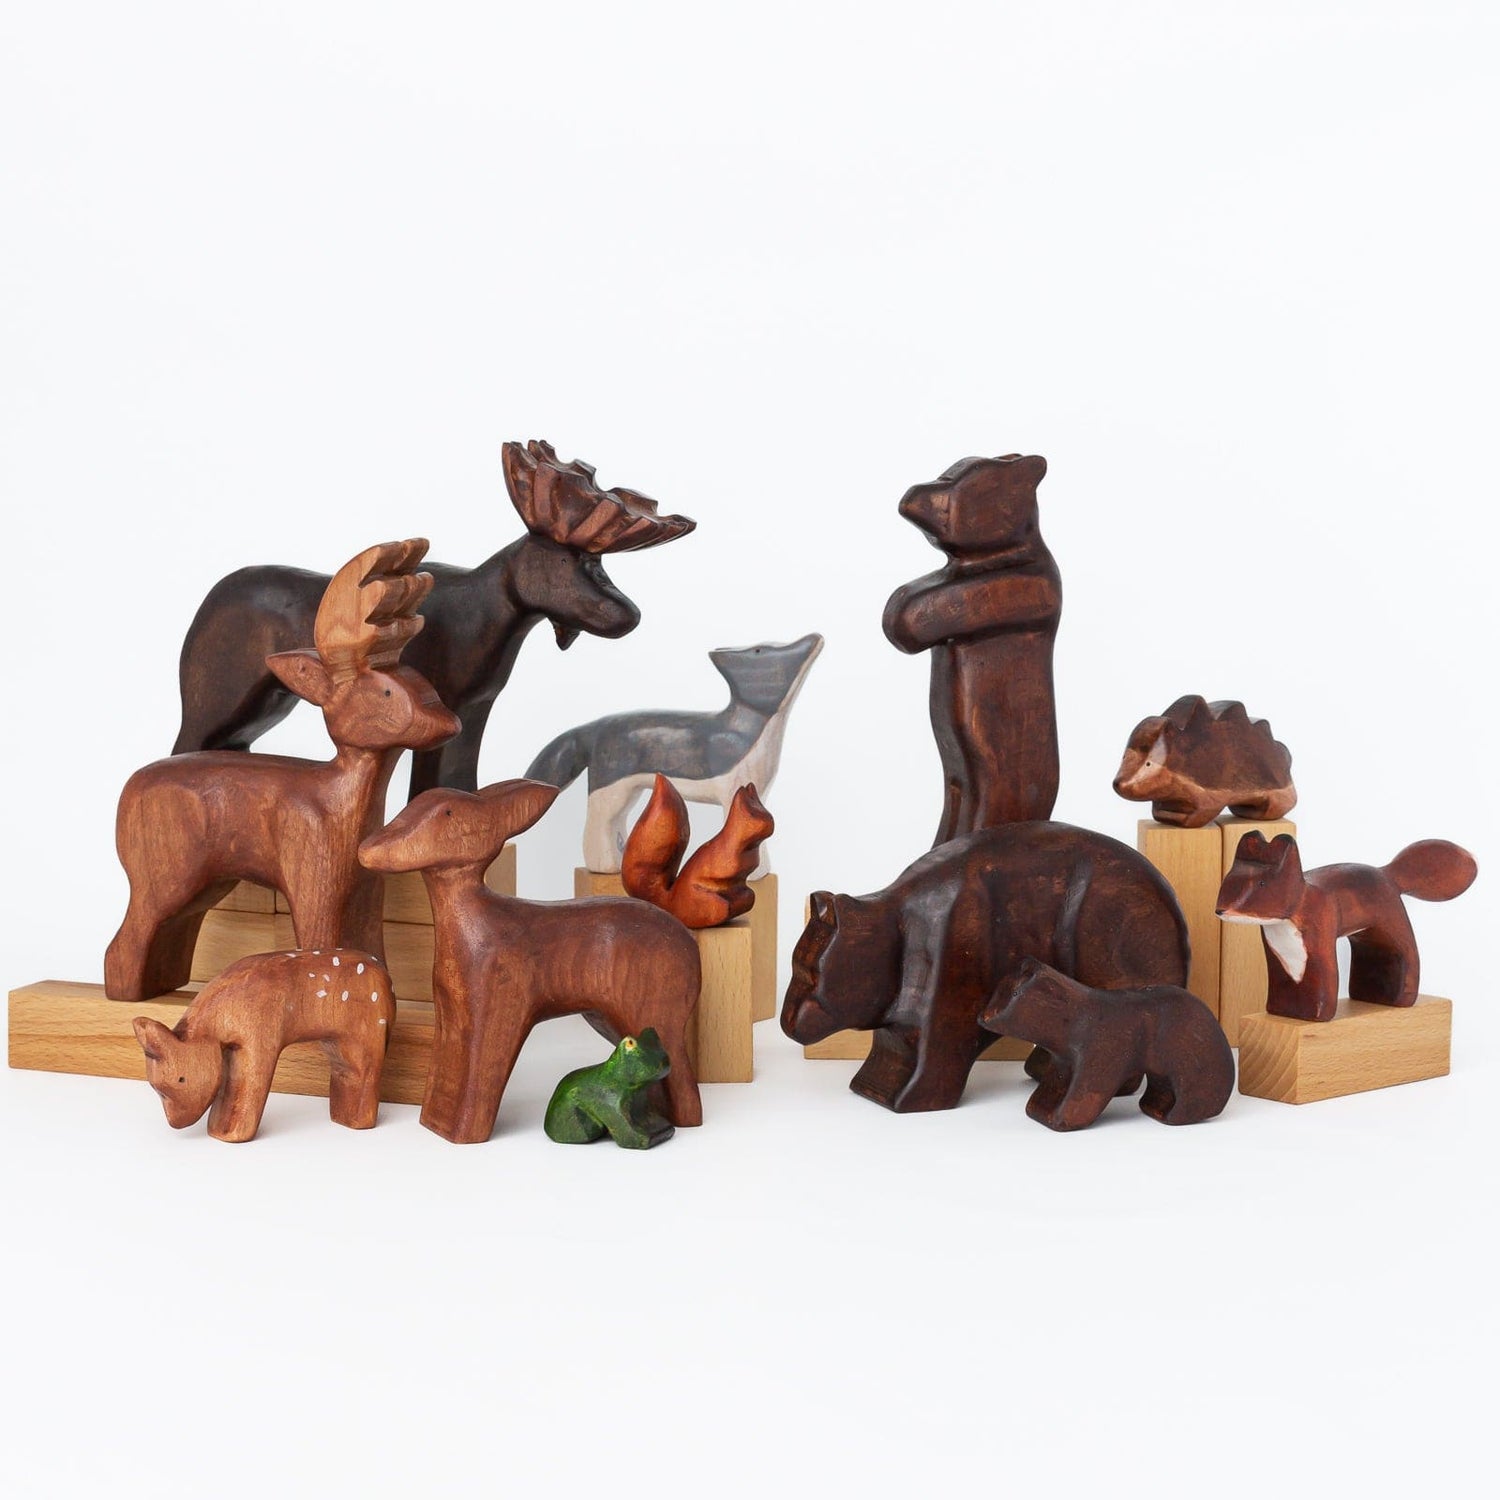 Bumbleberry Toys Wooden Animals "Delilah Doe" Wooden Animal Toy (Handmade in Canada)